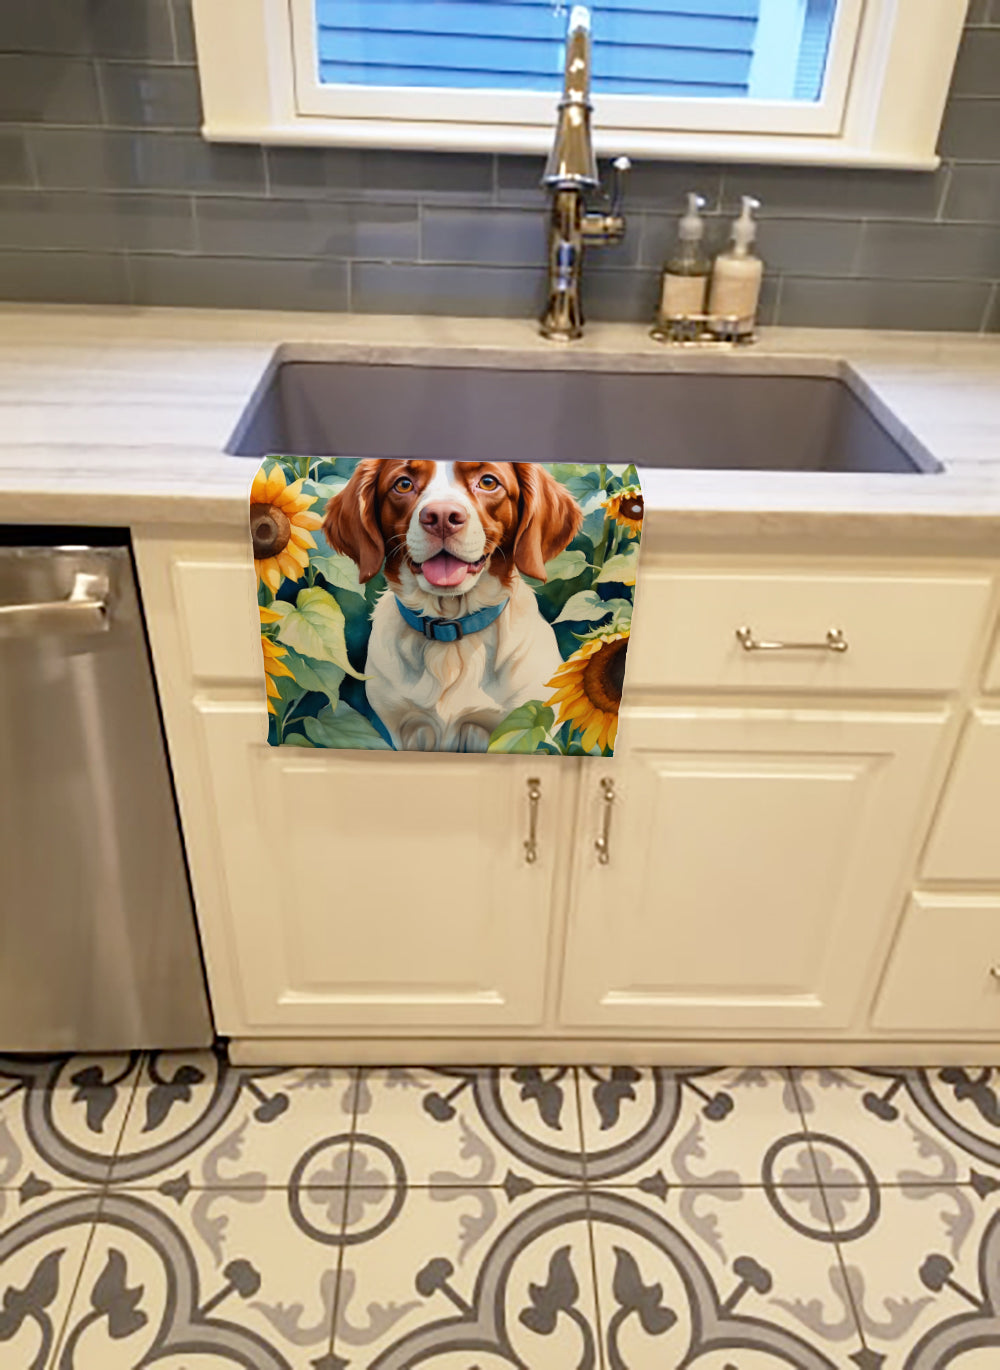 Buy this Brittany Spaniel in Sunflowers Kitchen Towel